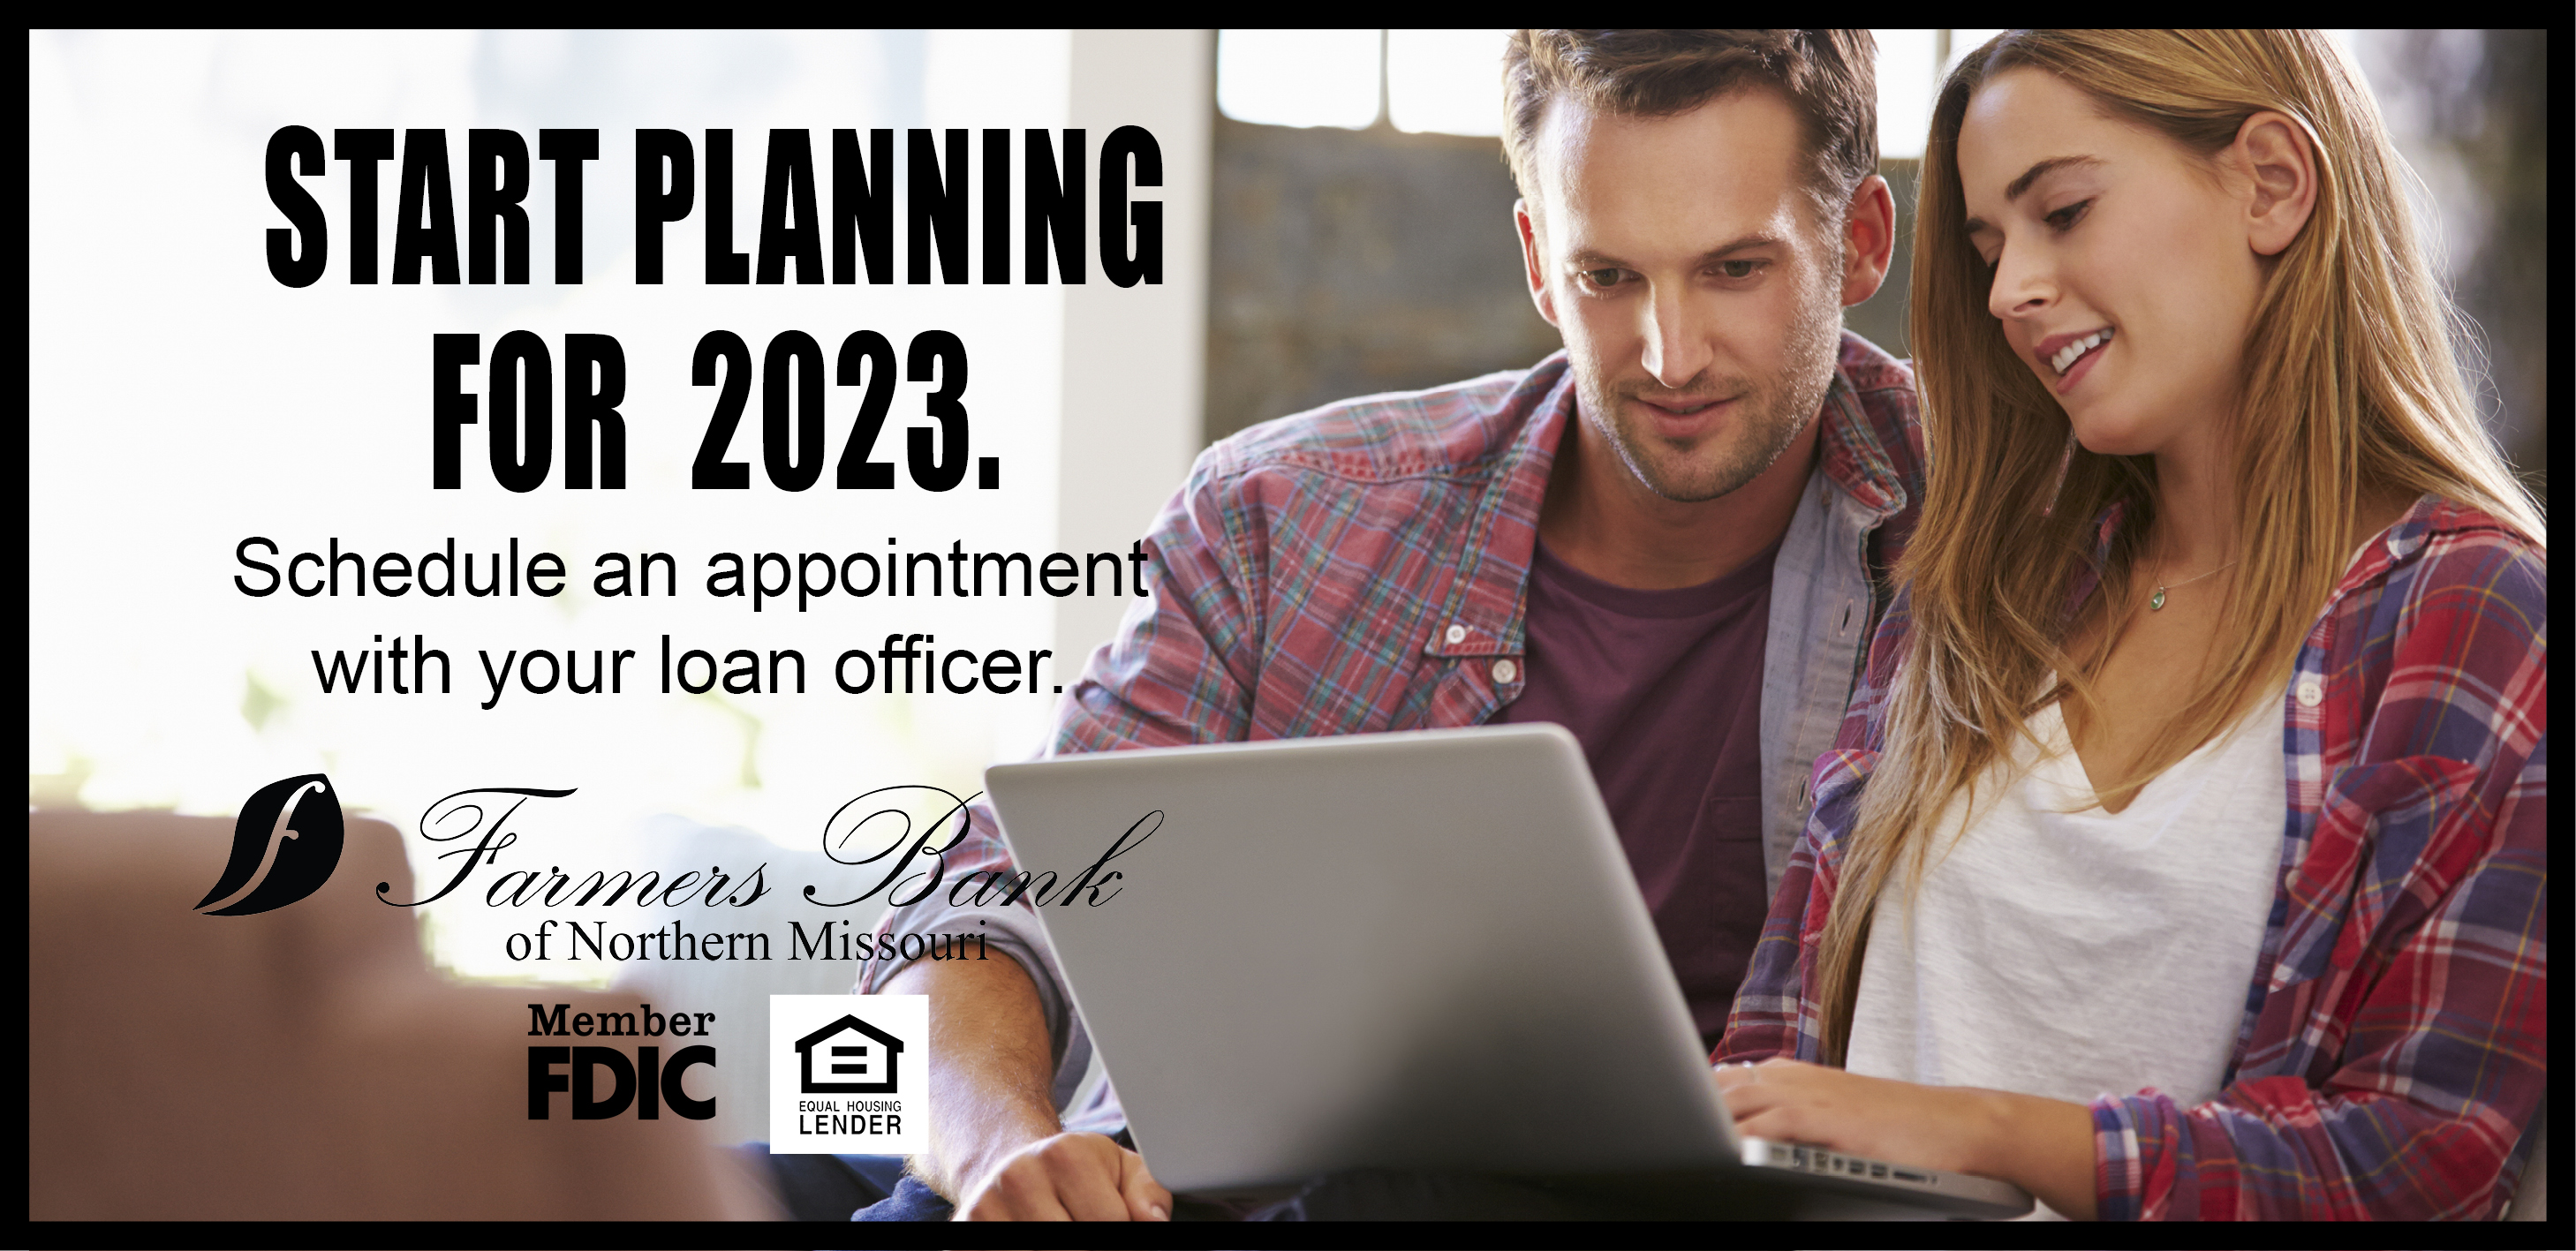 Start Planning for 2023. Schedule and appointment with your loan officer. Farmers Bank of Northern Missouri, Member FDIC, equal housing lender